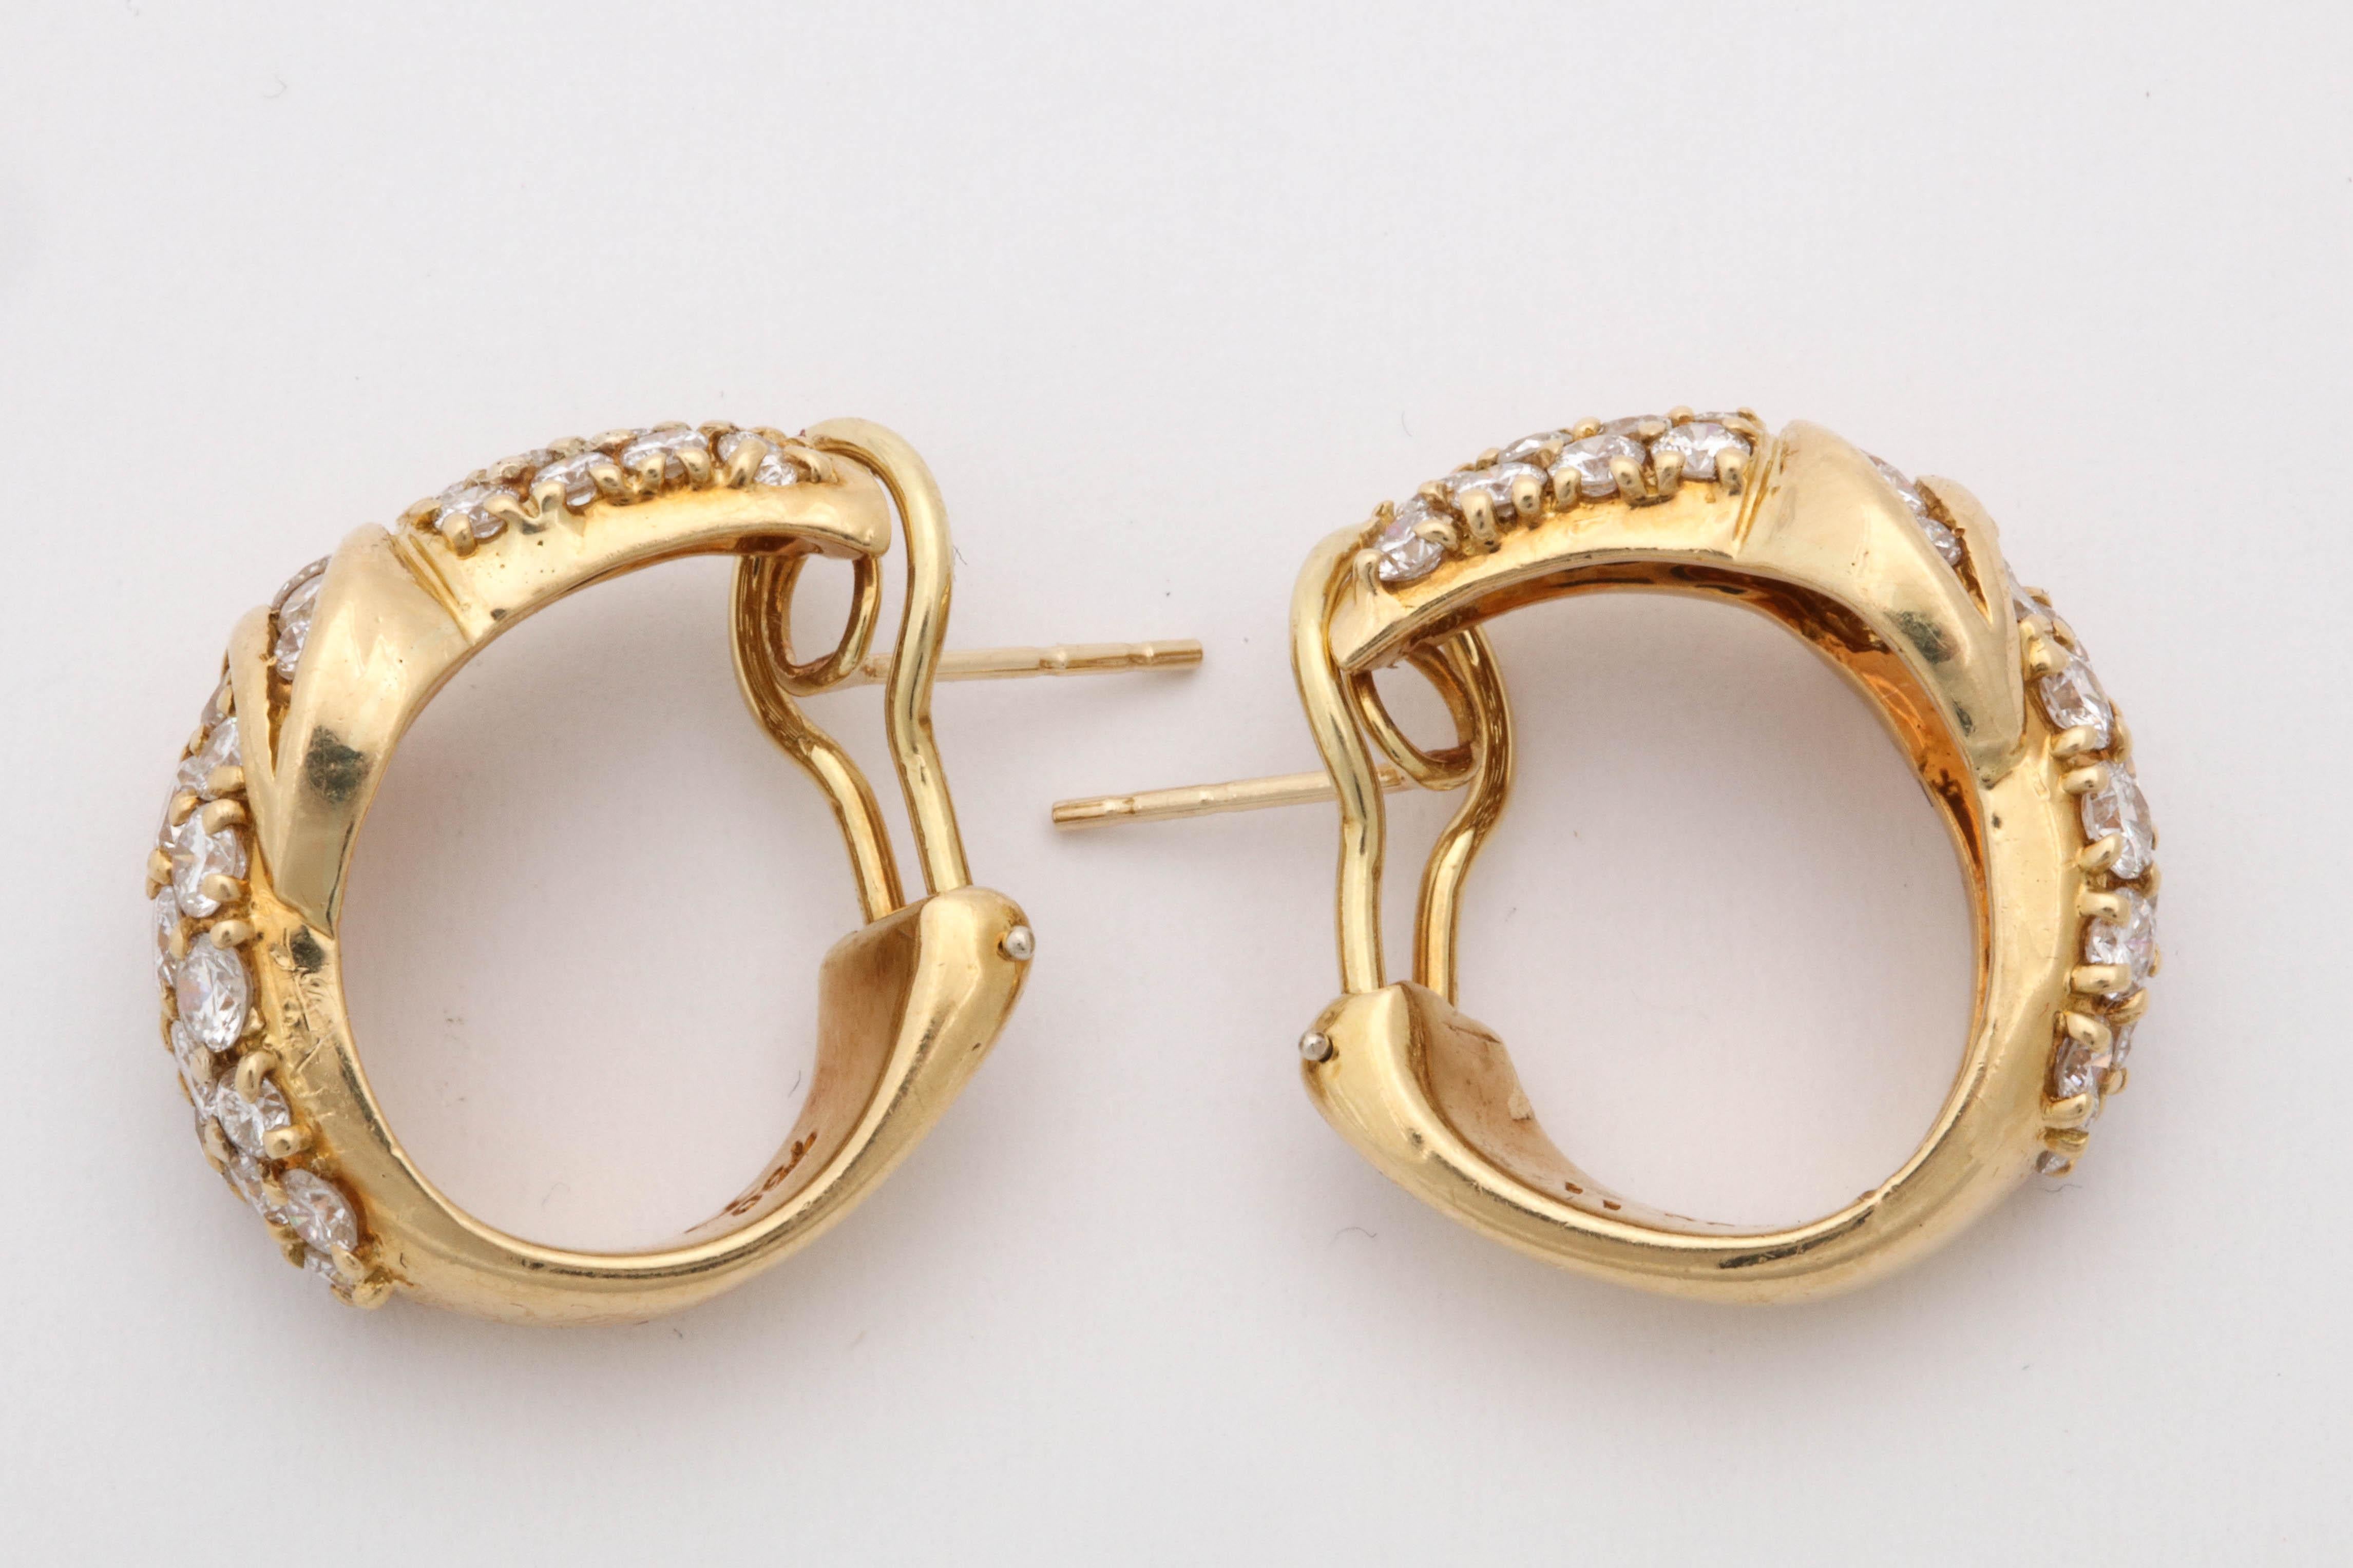 1960s Hammerman Half Hoop Design Diamond and Gold Clip-On Earrings with Posts 1